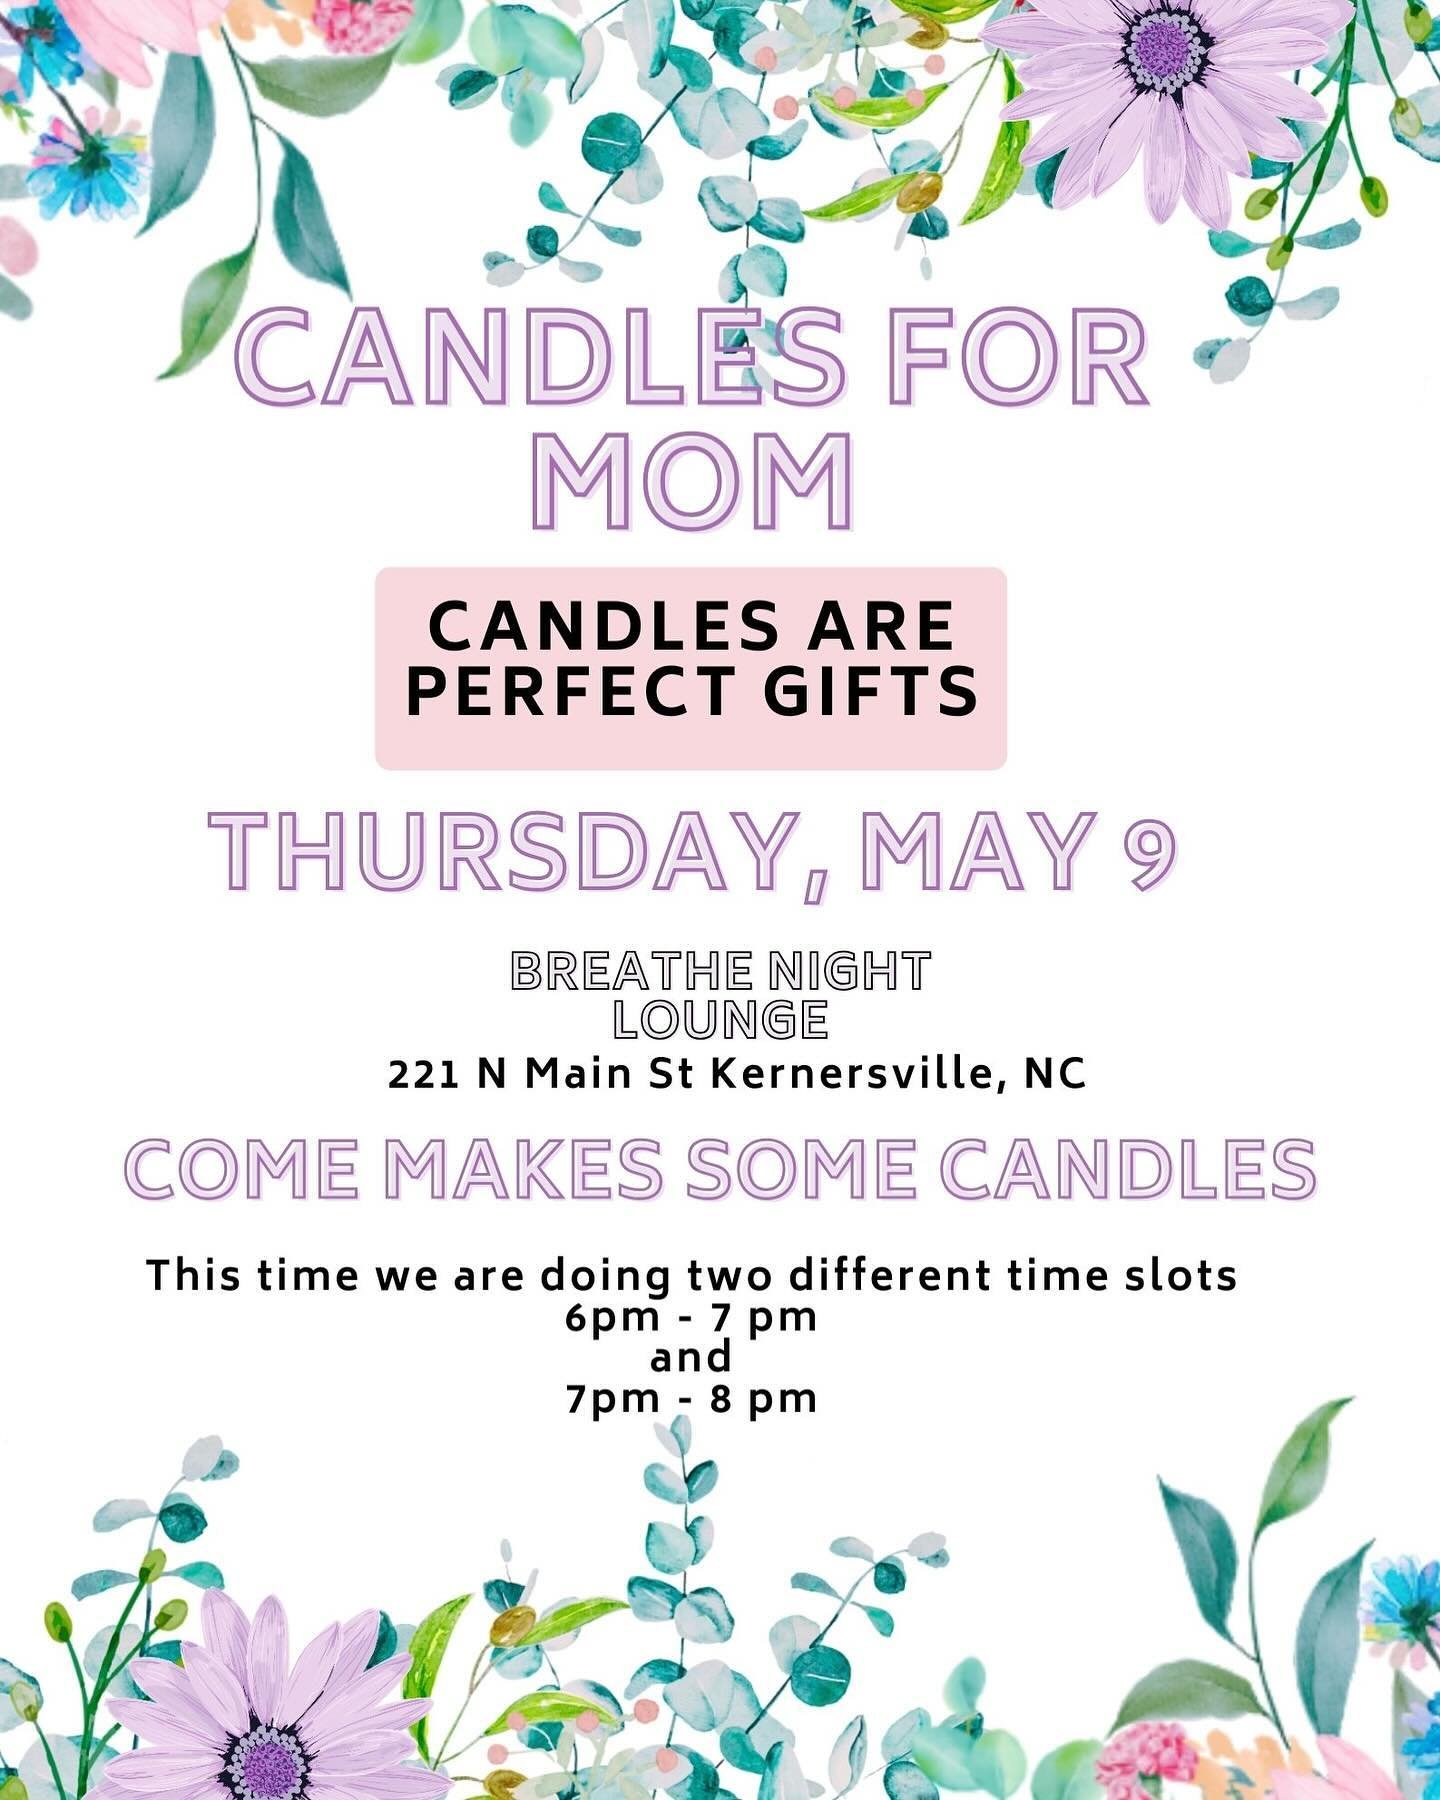 Come out and make some candles for MOM on May 9 at Breathe Night Lounge in Kernersville! Grab tickets today! Limited seats available!! Www.cozymetime.com